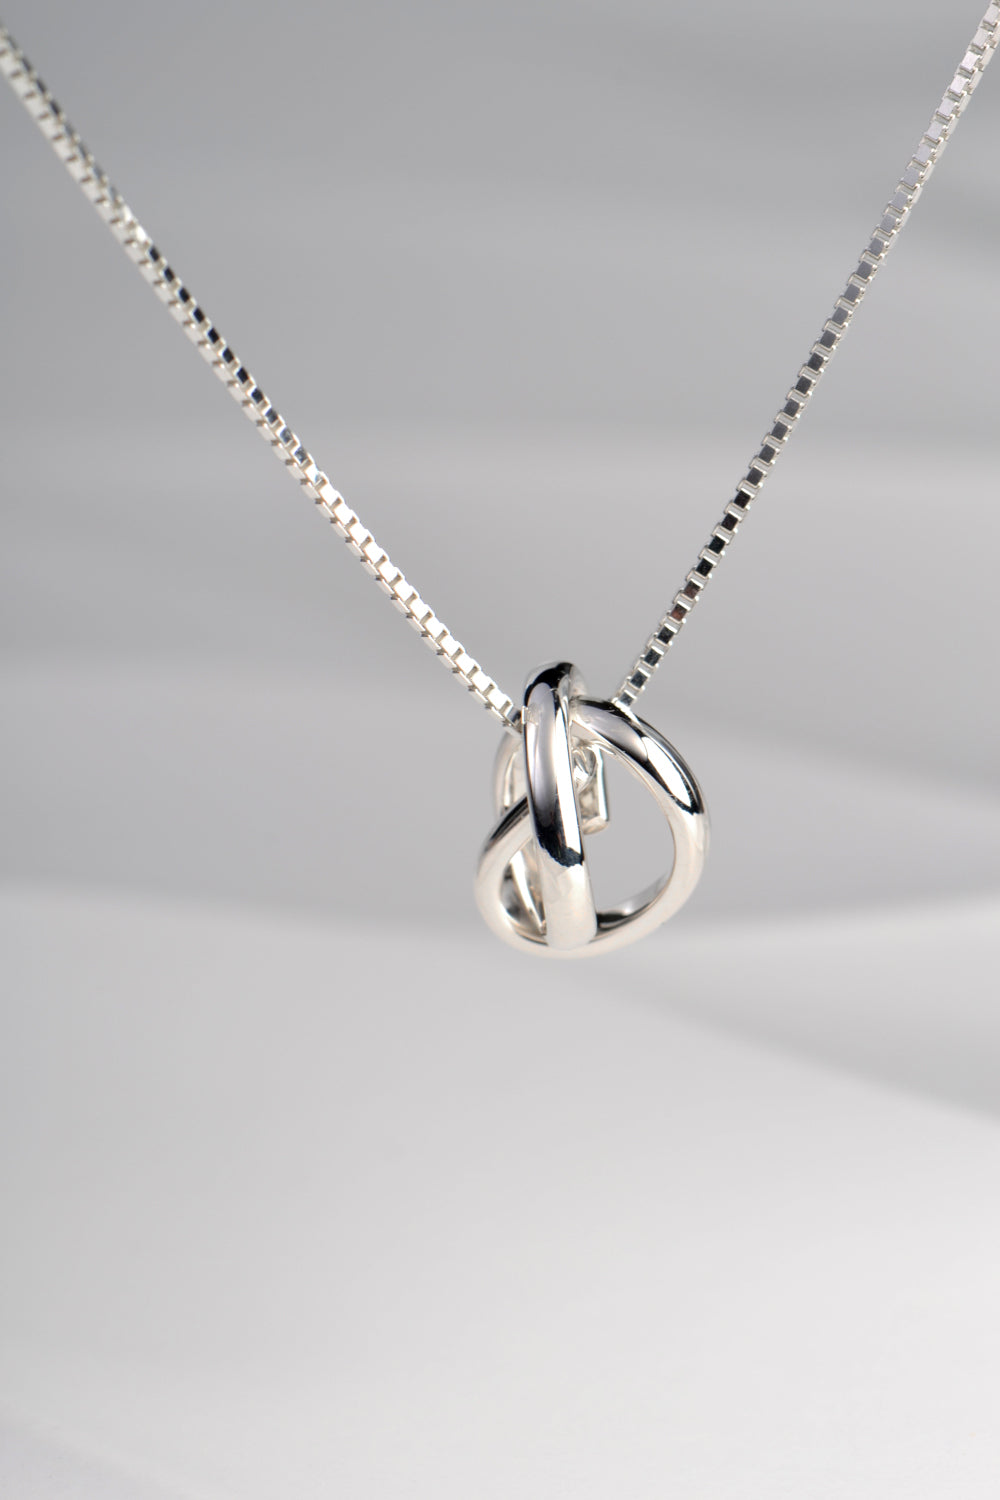 Knot the End small knot pendant